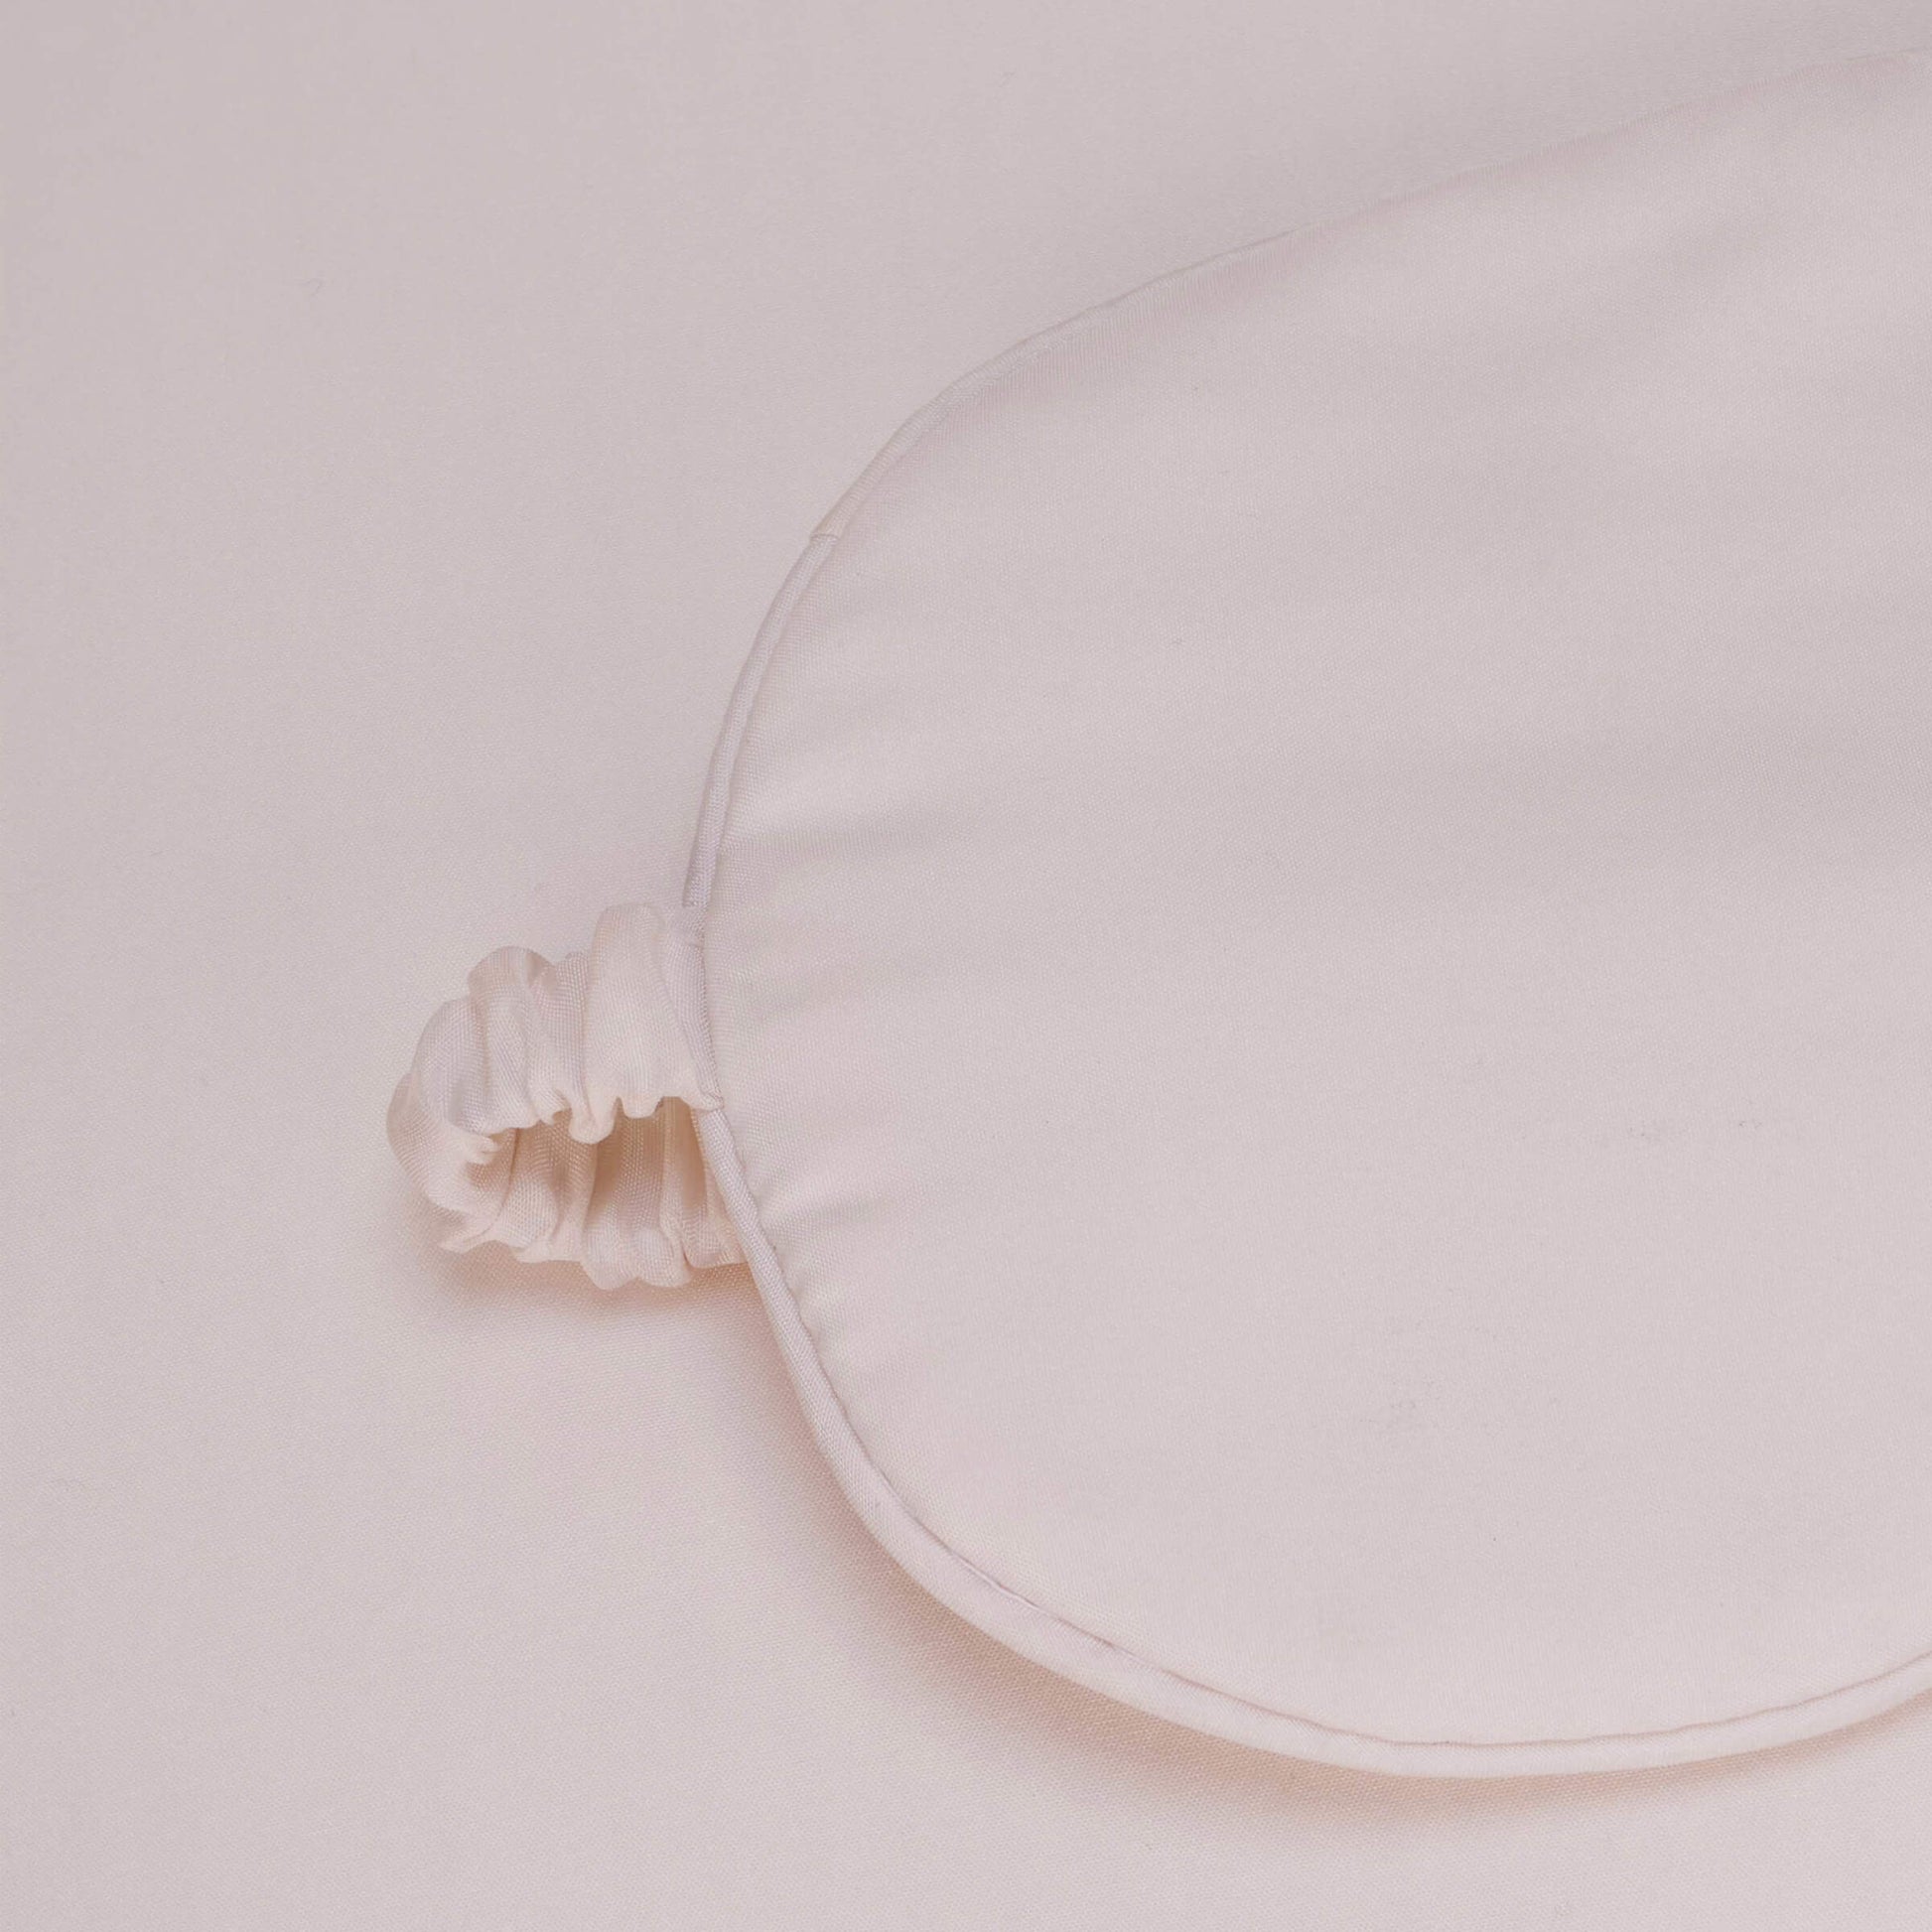 The Slumber Cloud Silk Pillowcase and Sleep Mask made with temperature regulation technology